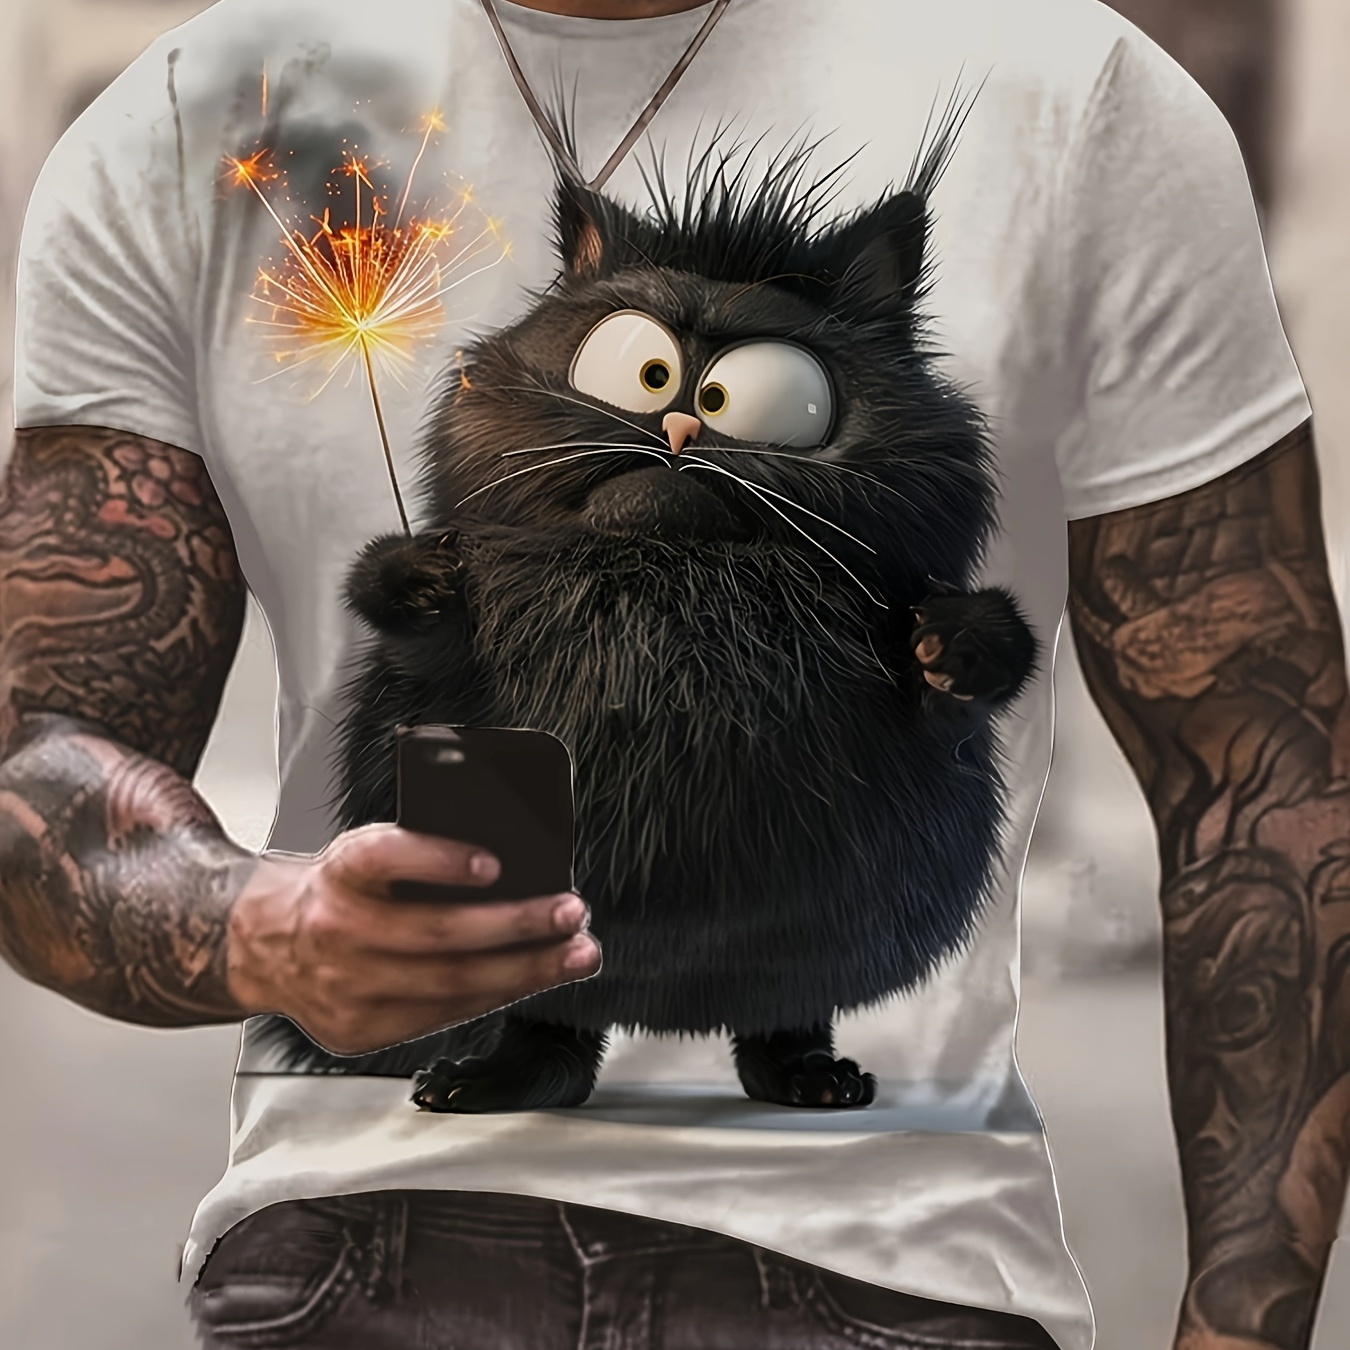 

Men's 3d Digital Animation Style Cat And Firework Pattern Crew Neck Short Sleeve T-shirt, Casual And Trendy Comfy Tops For Summer Outdoors Wear